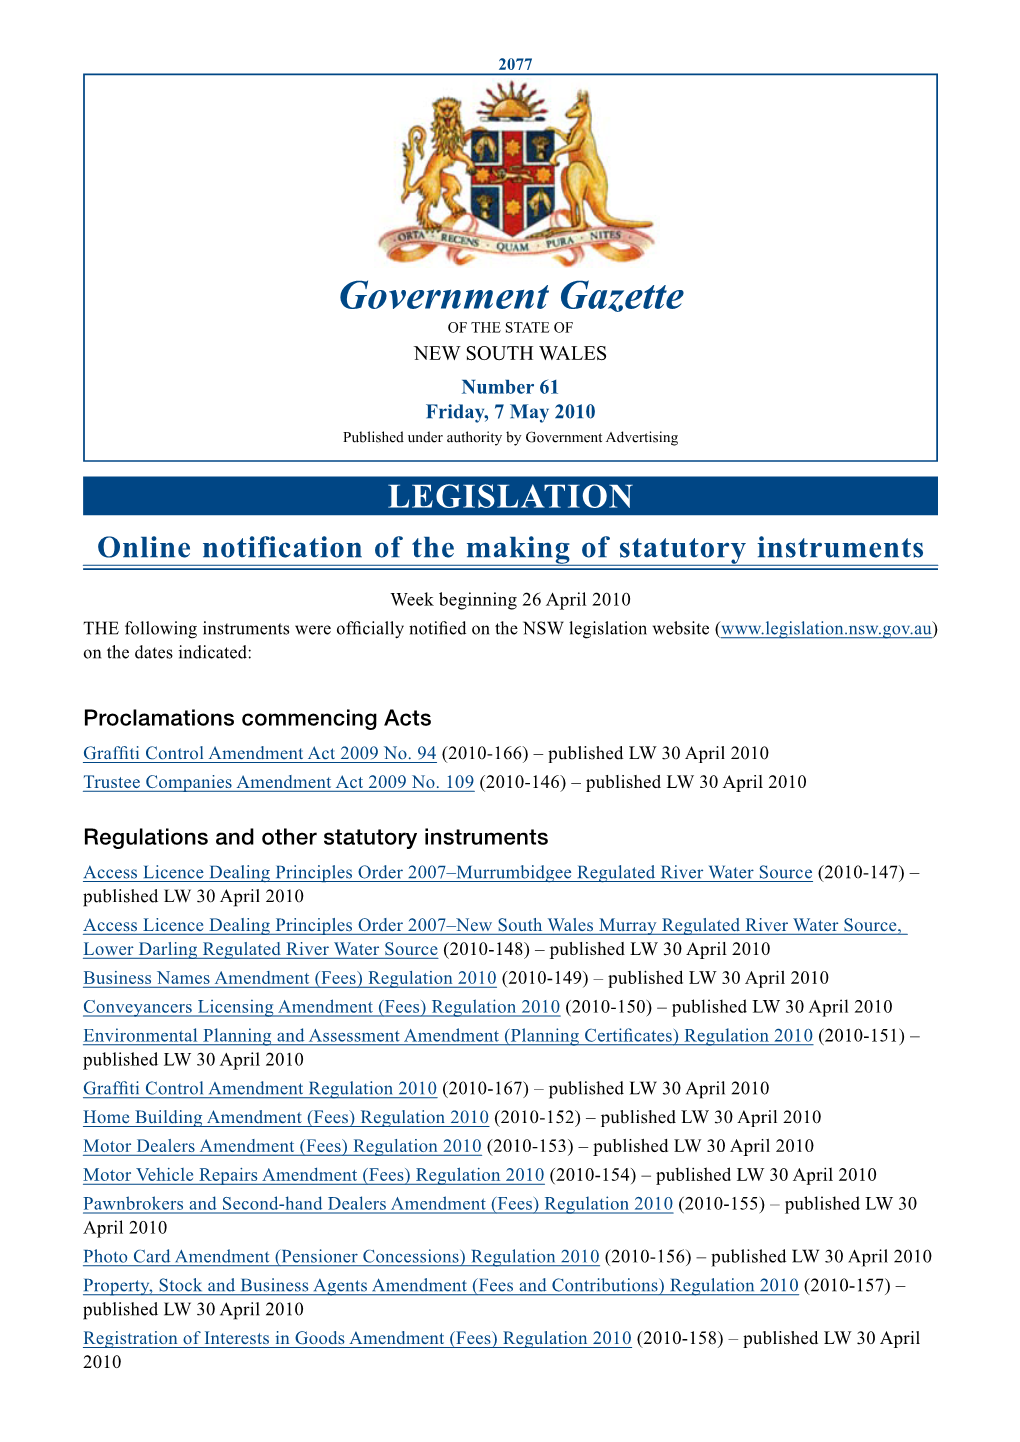 Government Gazette of the STATE of NEW SOUTH WALES Number 61 Friday, 7 May 2010 Published Under Authority by Government Advertising